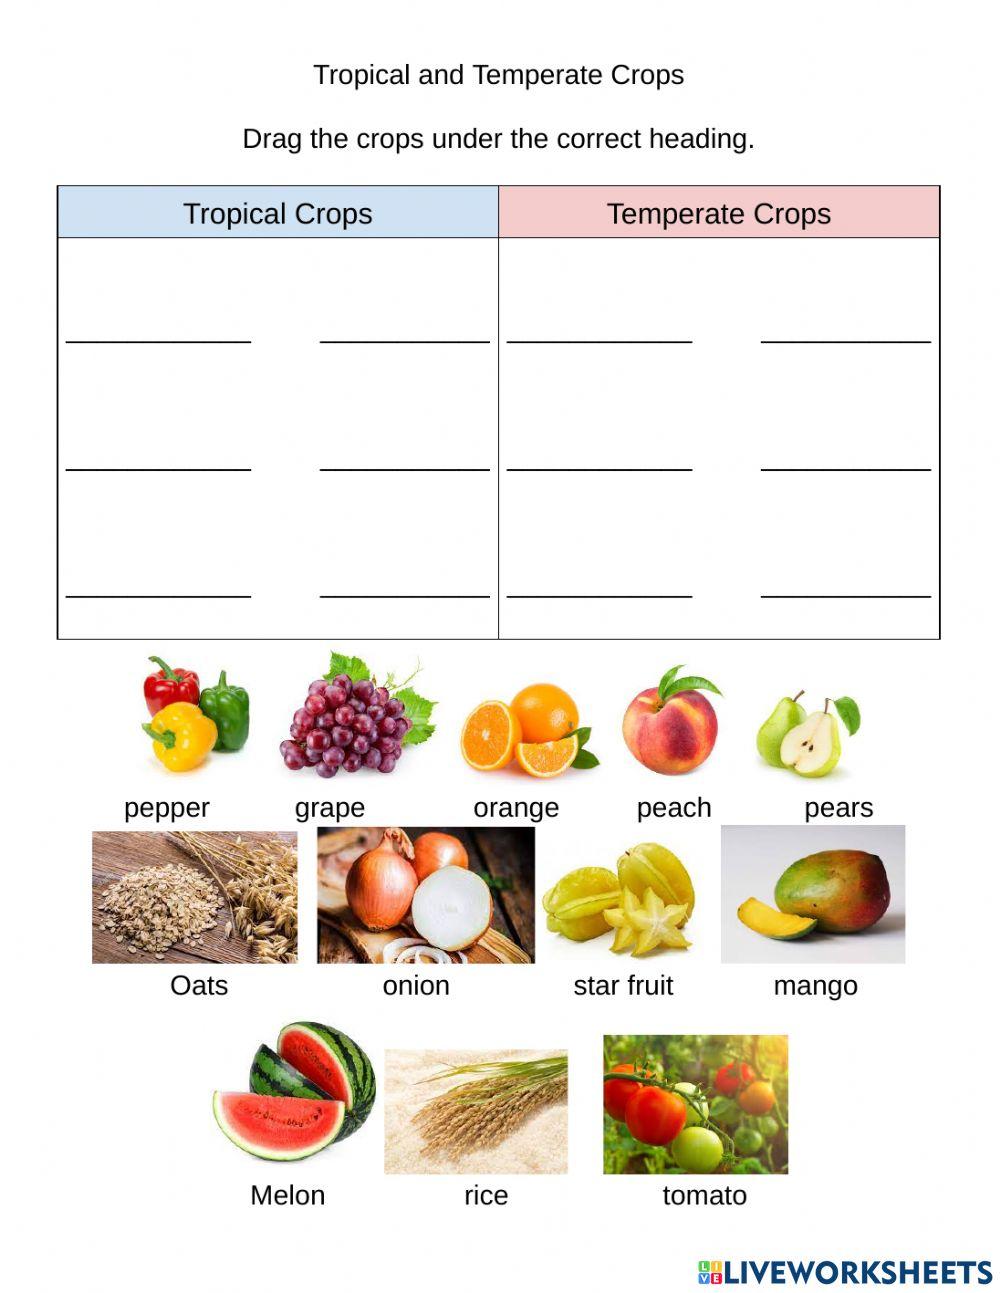 Tropical and Temperate Crops